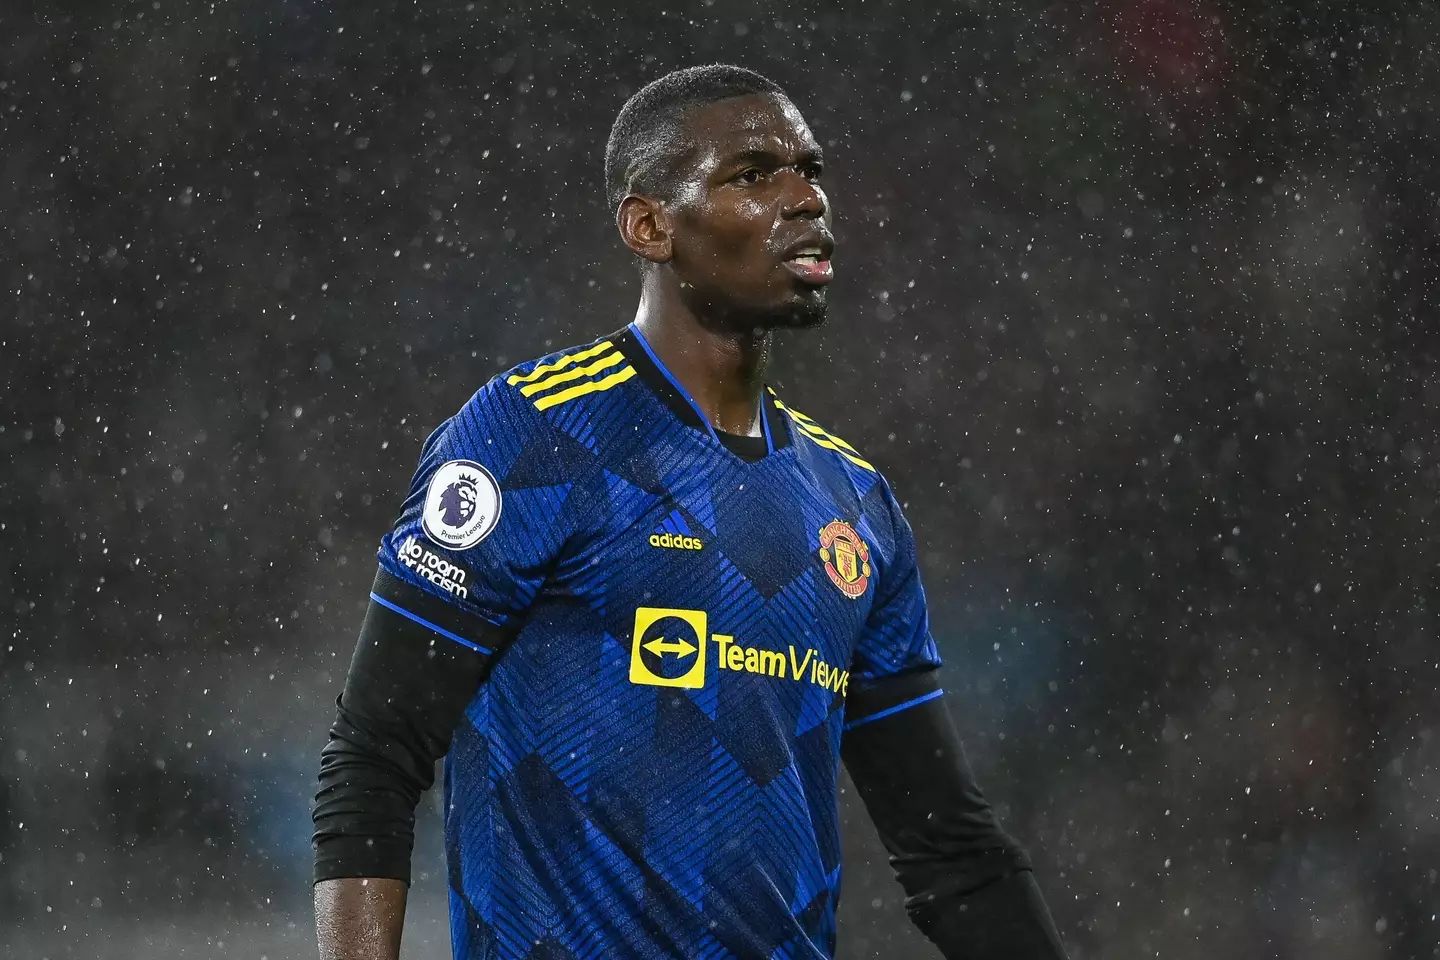 Paul Pogba playing for Manchester United in the rain |